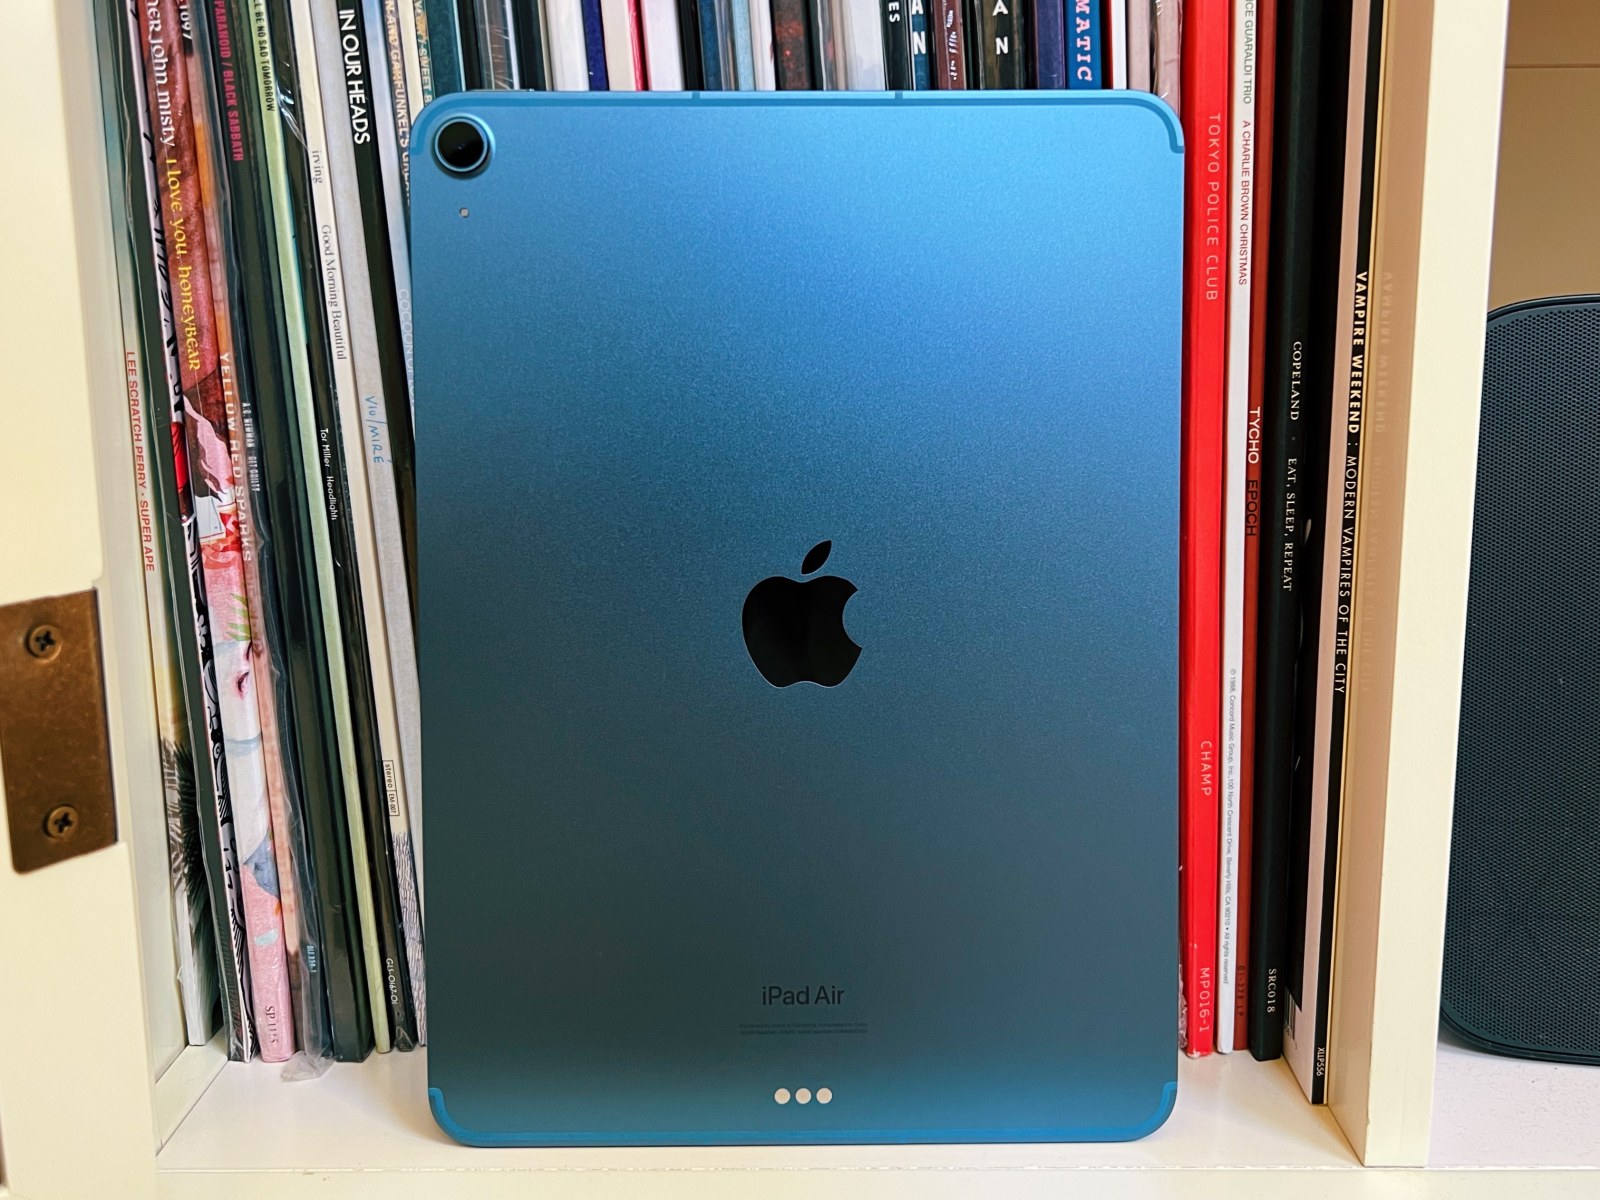 iPad Air 4 review: More pro than not